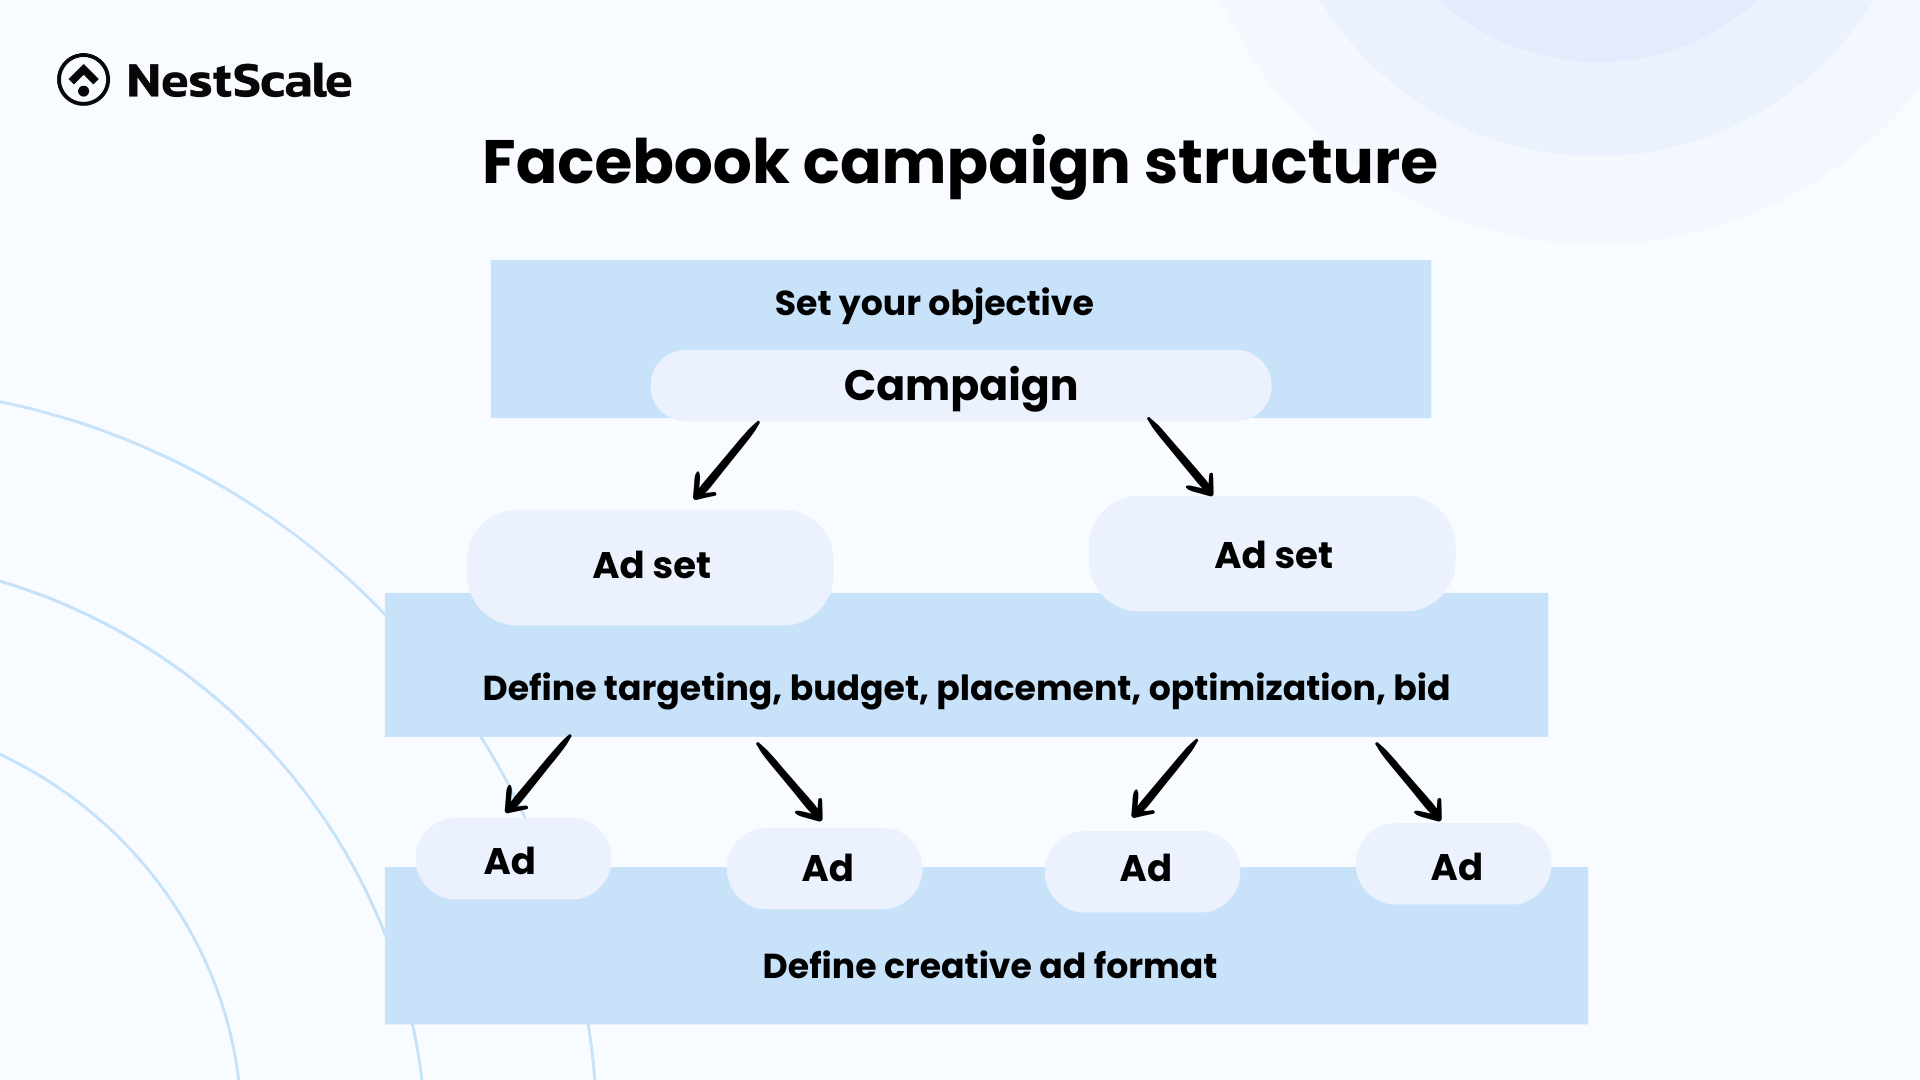 Facebook campaign structures
